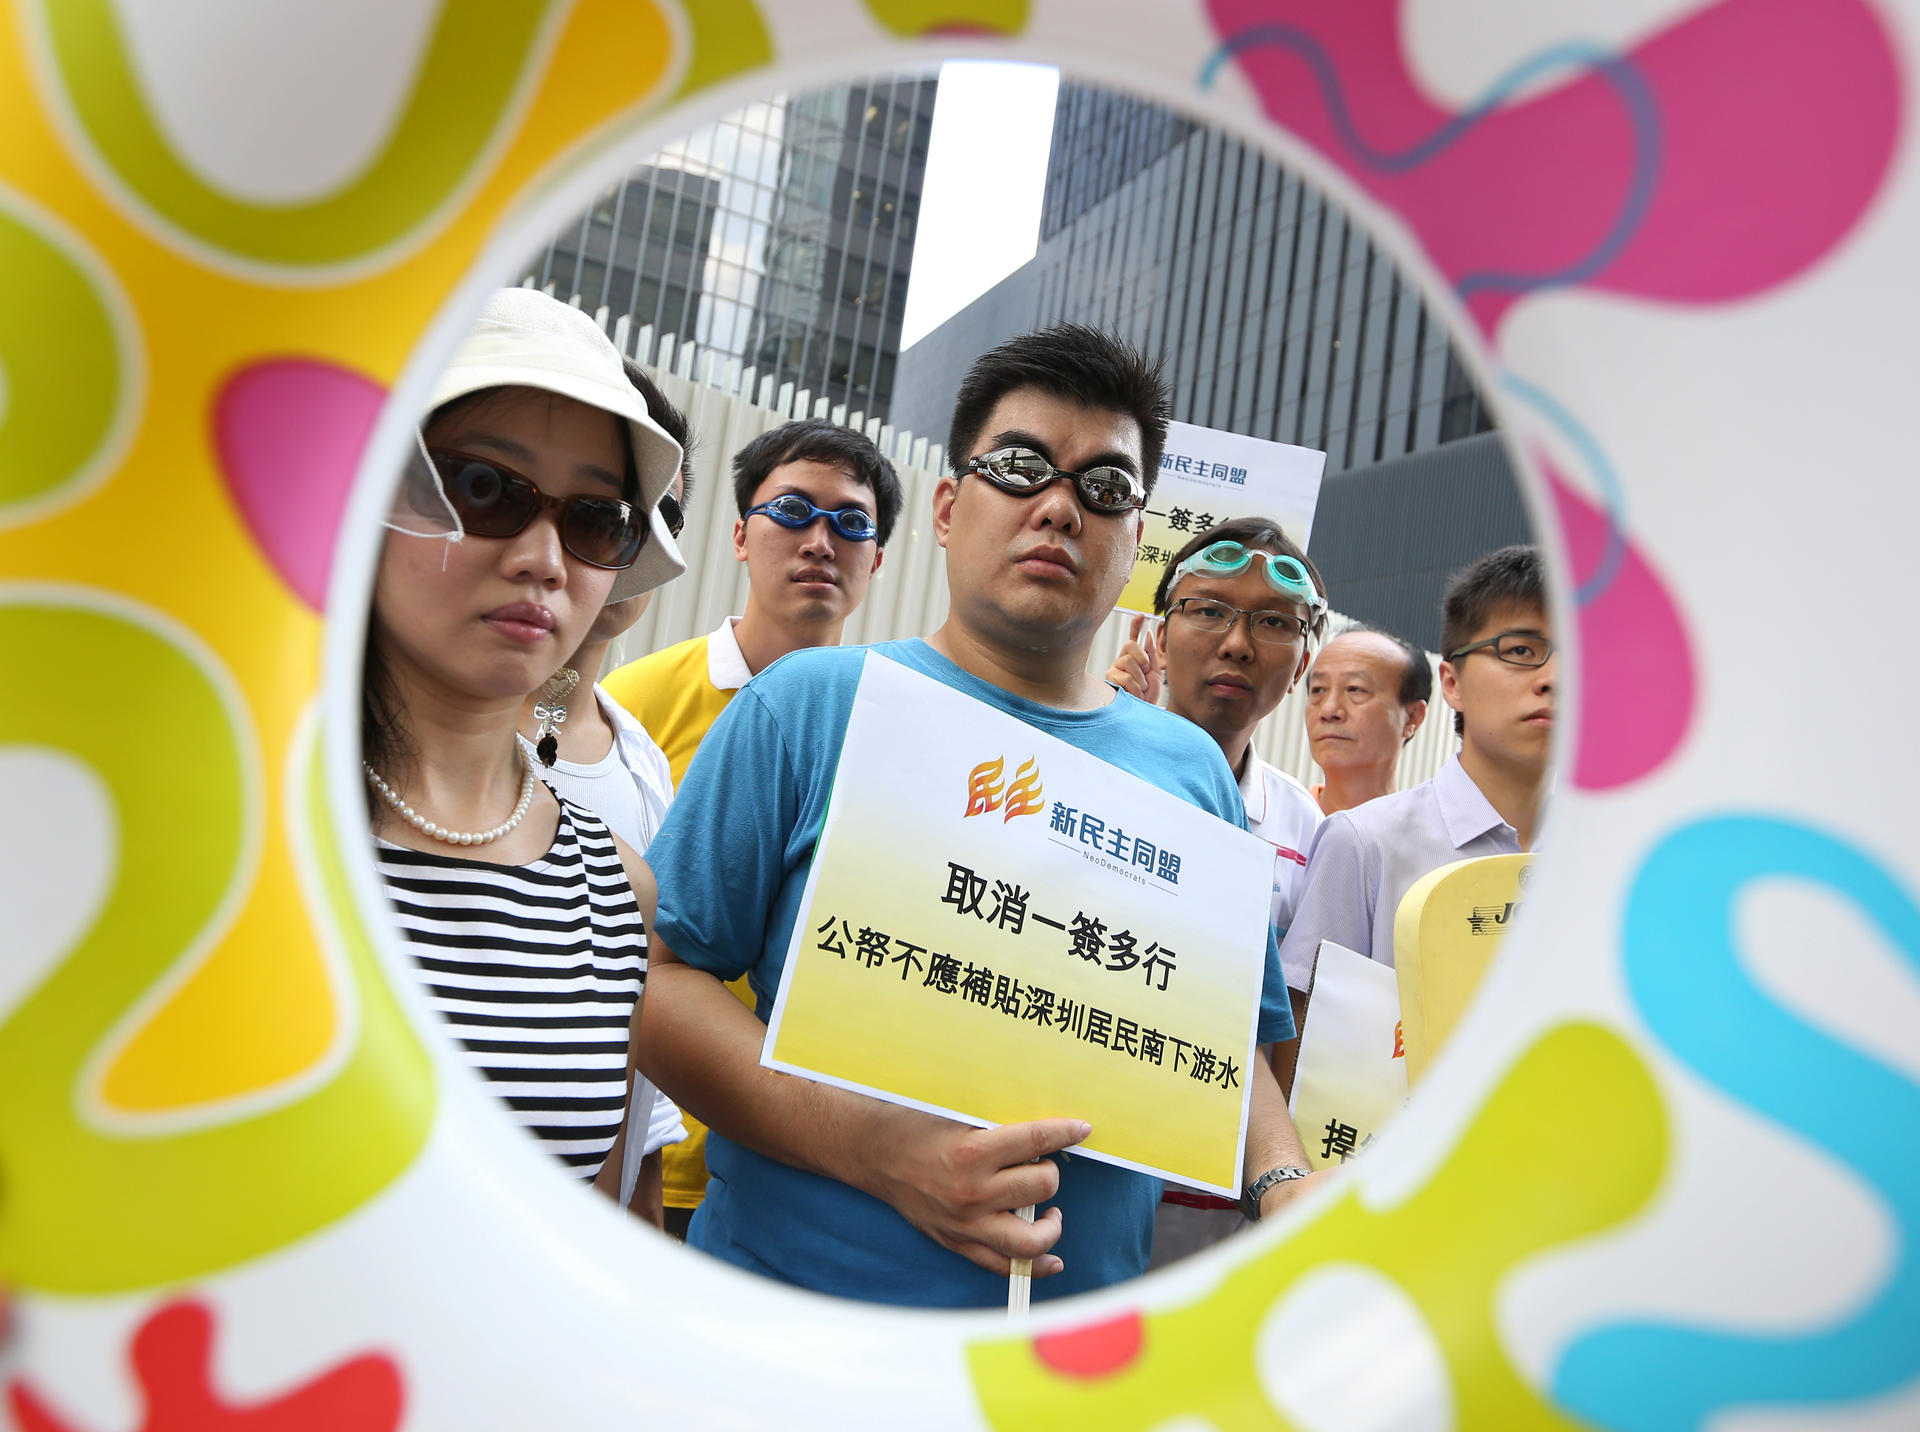 NeoDemocrats at government headquarters call for the abolition of multi-entry permits for Shenzhen residents. Photo: Sam Tsang